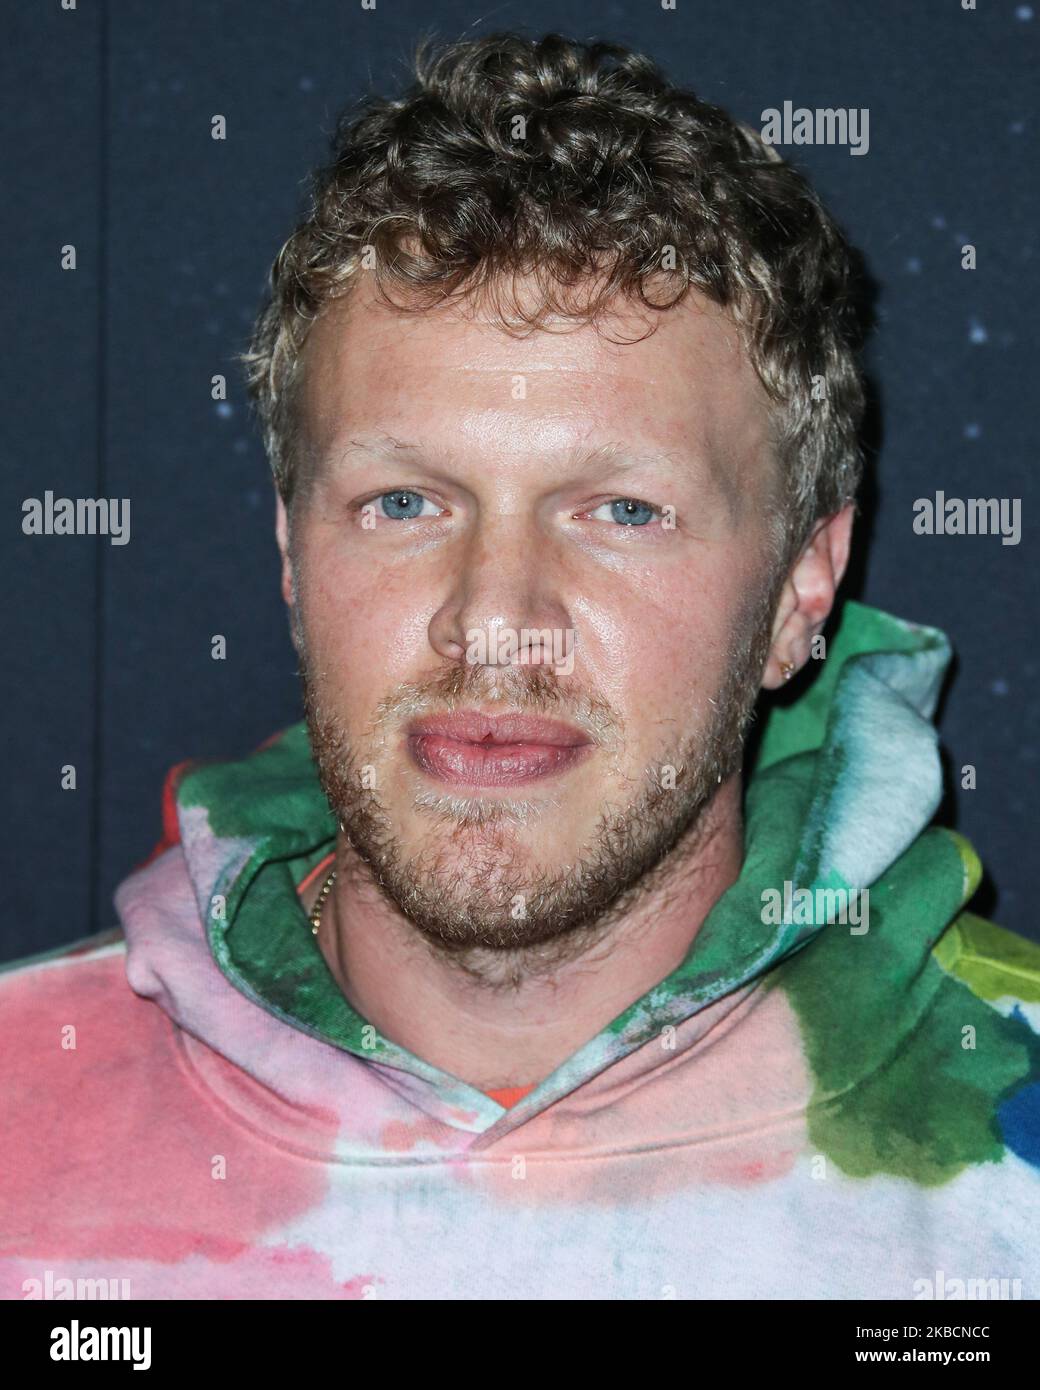 HOLLYWOOD, LOS ANGELES, CALIFORNIA, USA - DECEMBER 11: Actor Sebastian Bear McClard arrives at the Los Angeles Premiere Of A24's 'Uncut Gems' held at the ArcLight Cinerama Dome on December 11, 2019 in Hollywood, Los Angeles, California, United States. (Photo by Xavier Collin/Image Press Agency/NurPhoto) Stock Photo